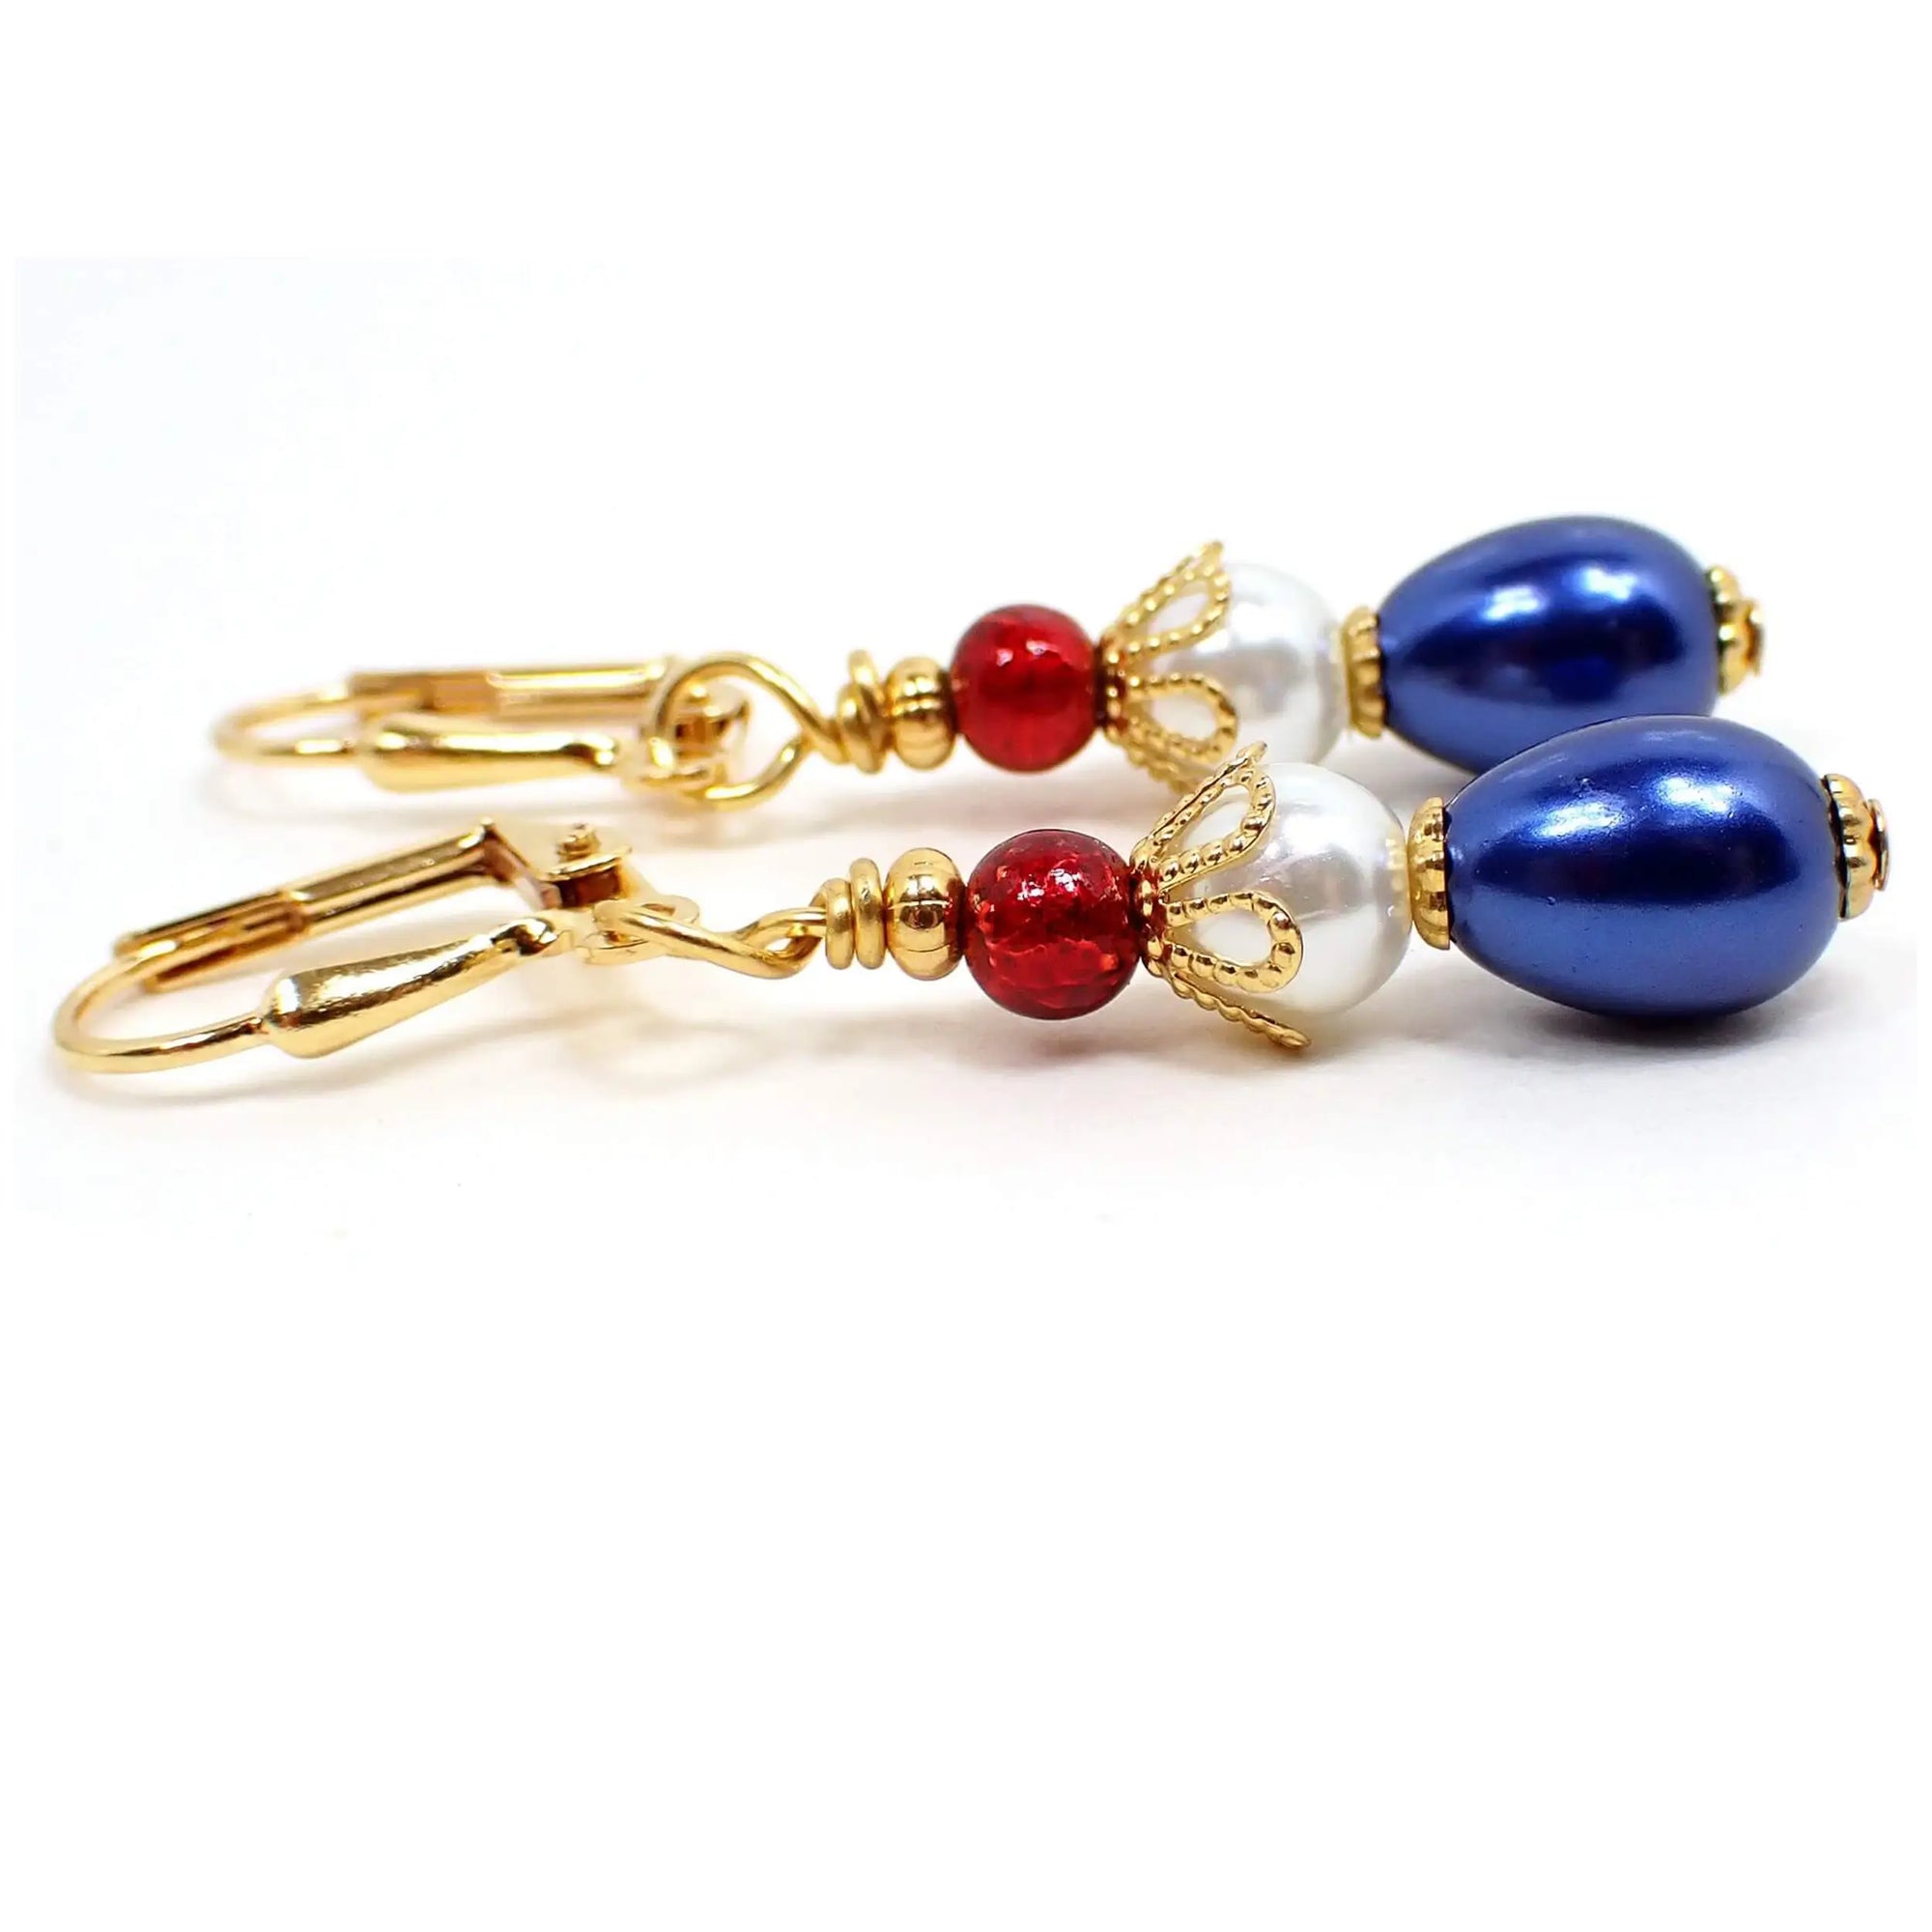 Enlarged side view of the red white and blue handmade earrings. The metal is gold plated in color. There is a small metallic red glass bead at the top, a white faux pearl bead in the middle, and a metallic blue teardrop bead at the bottom.